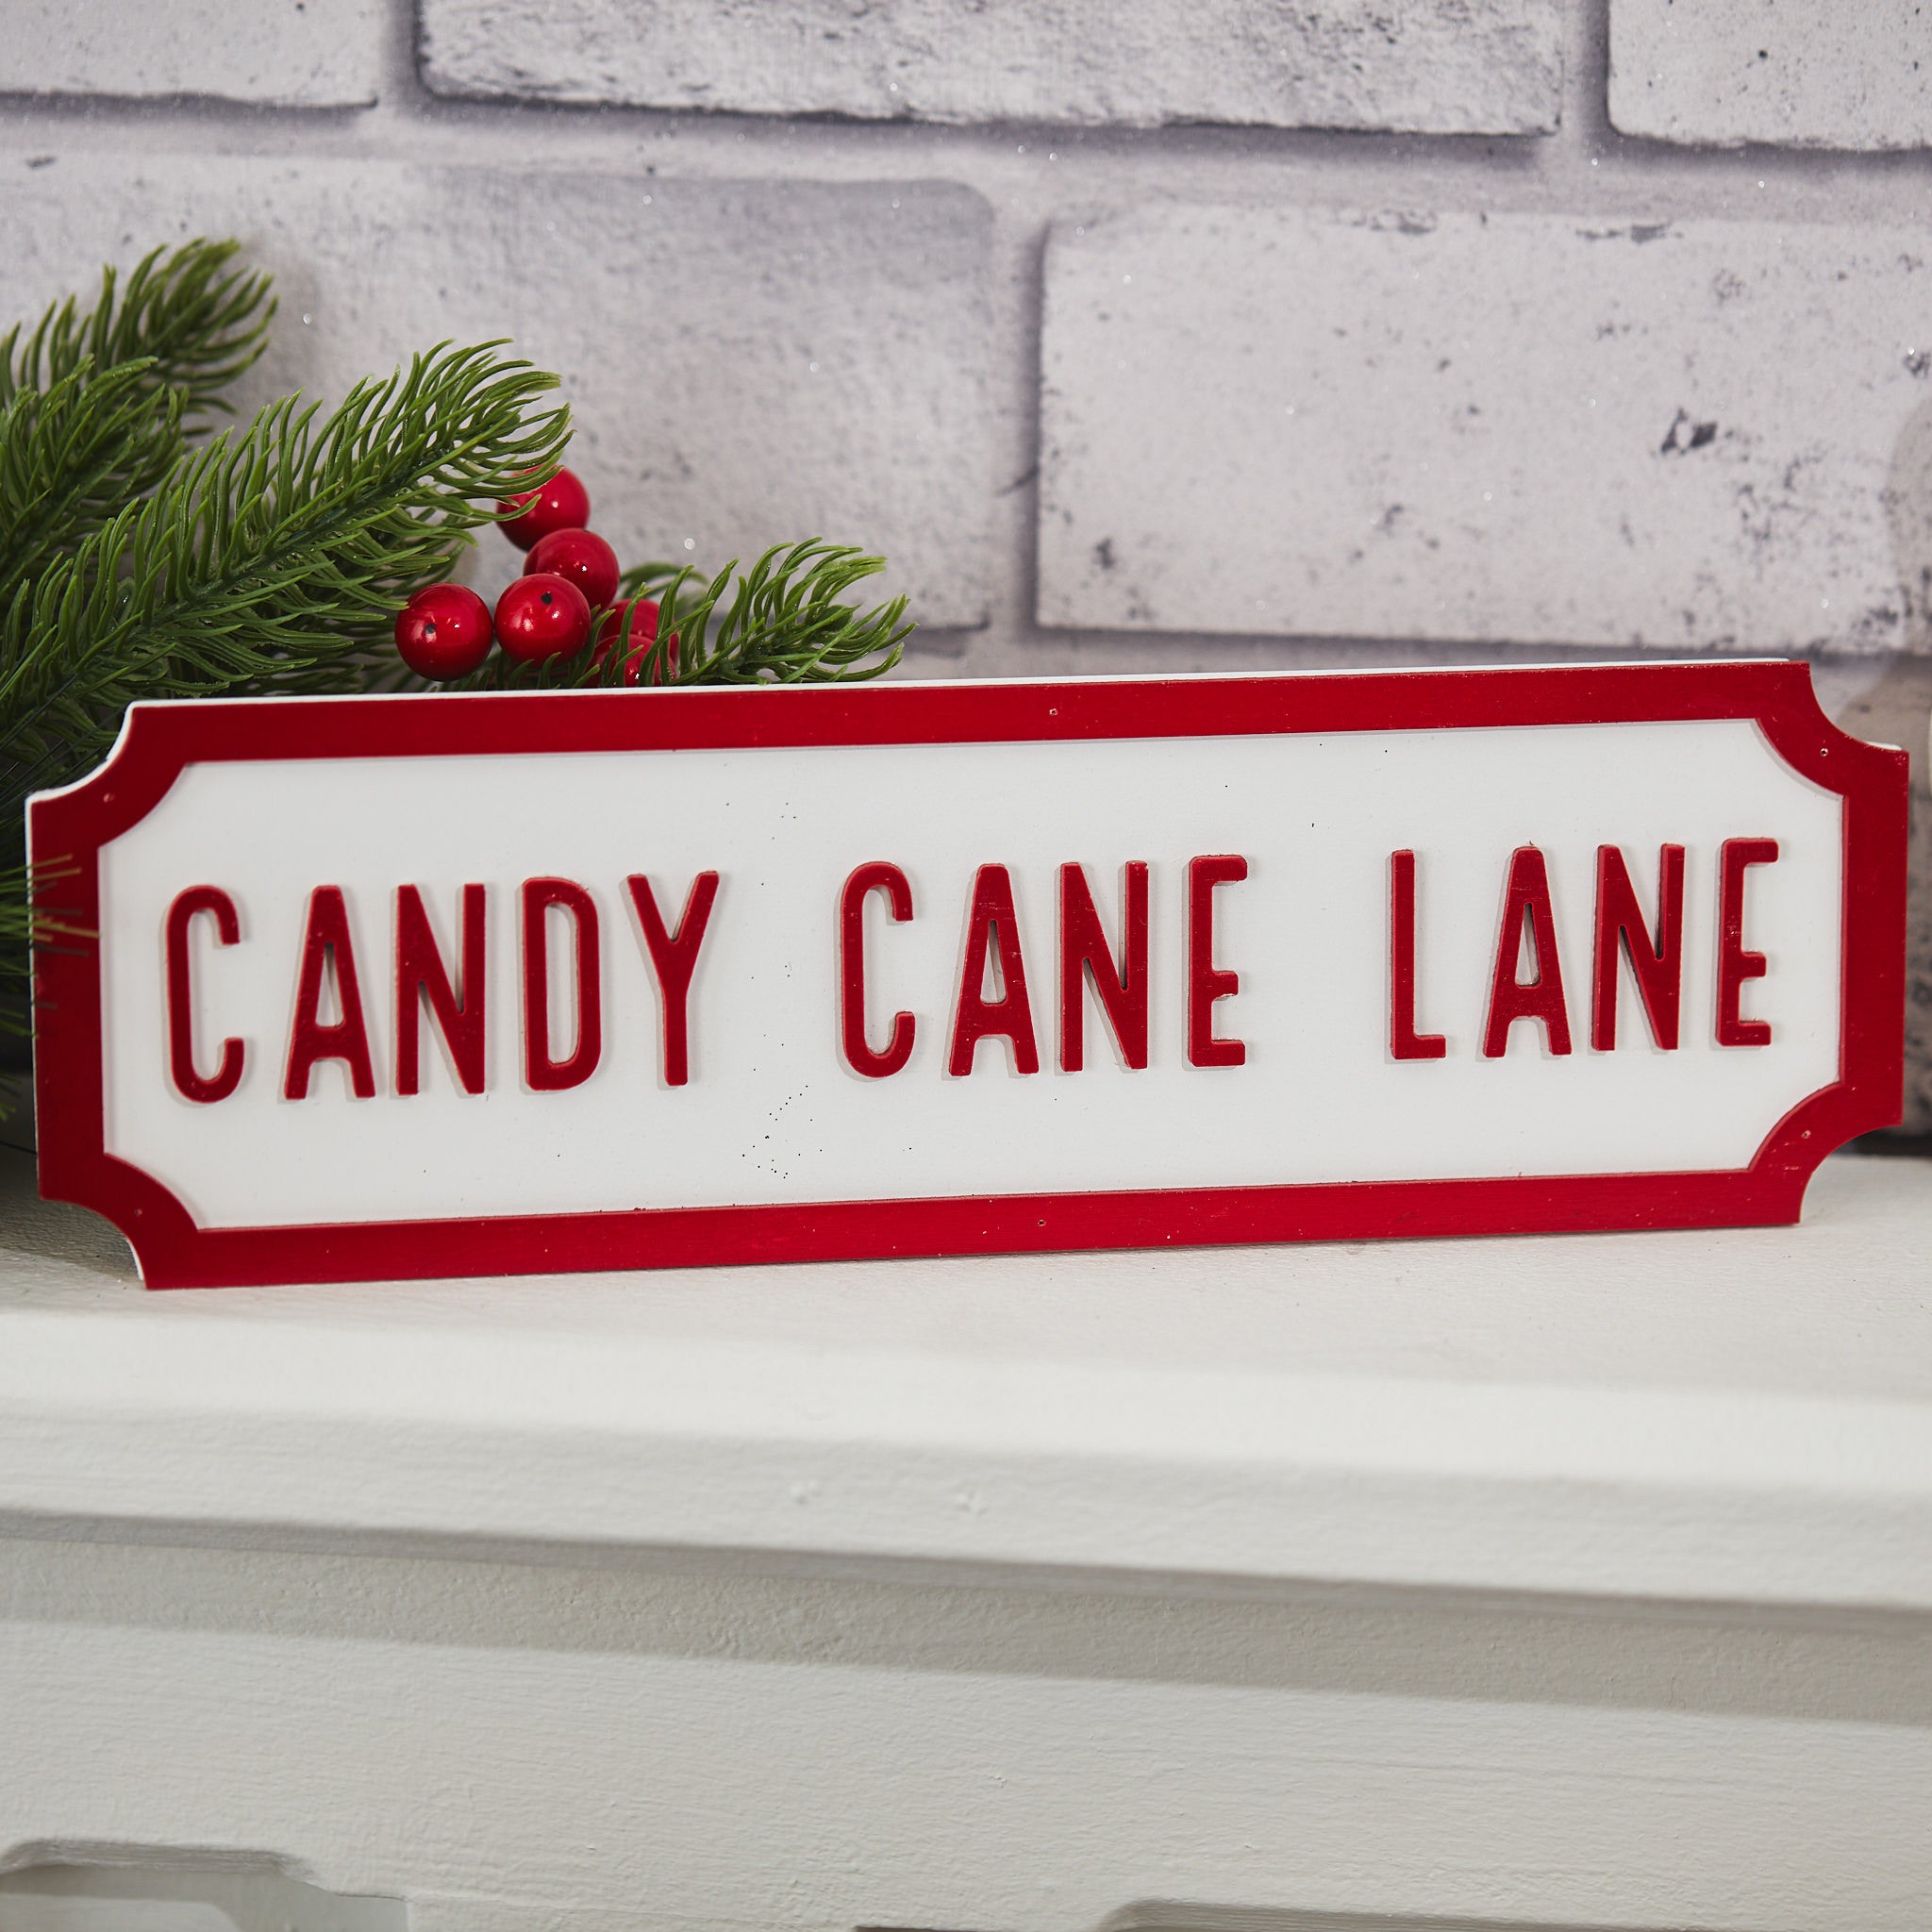 Candy Cane Lane Vintage Style Street Sign